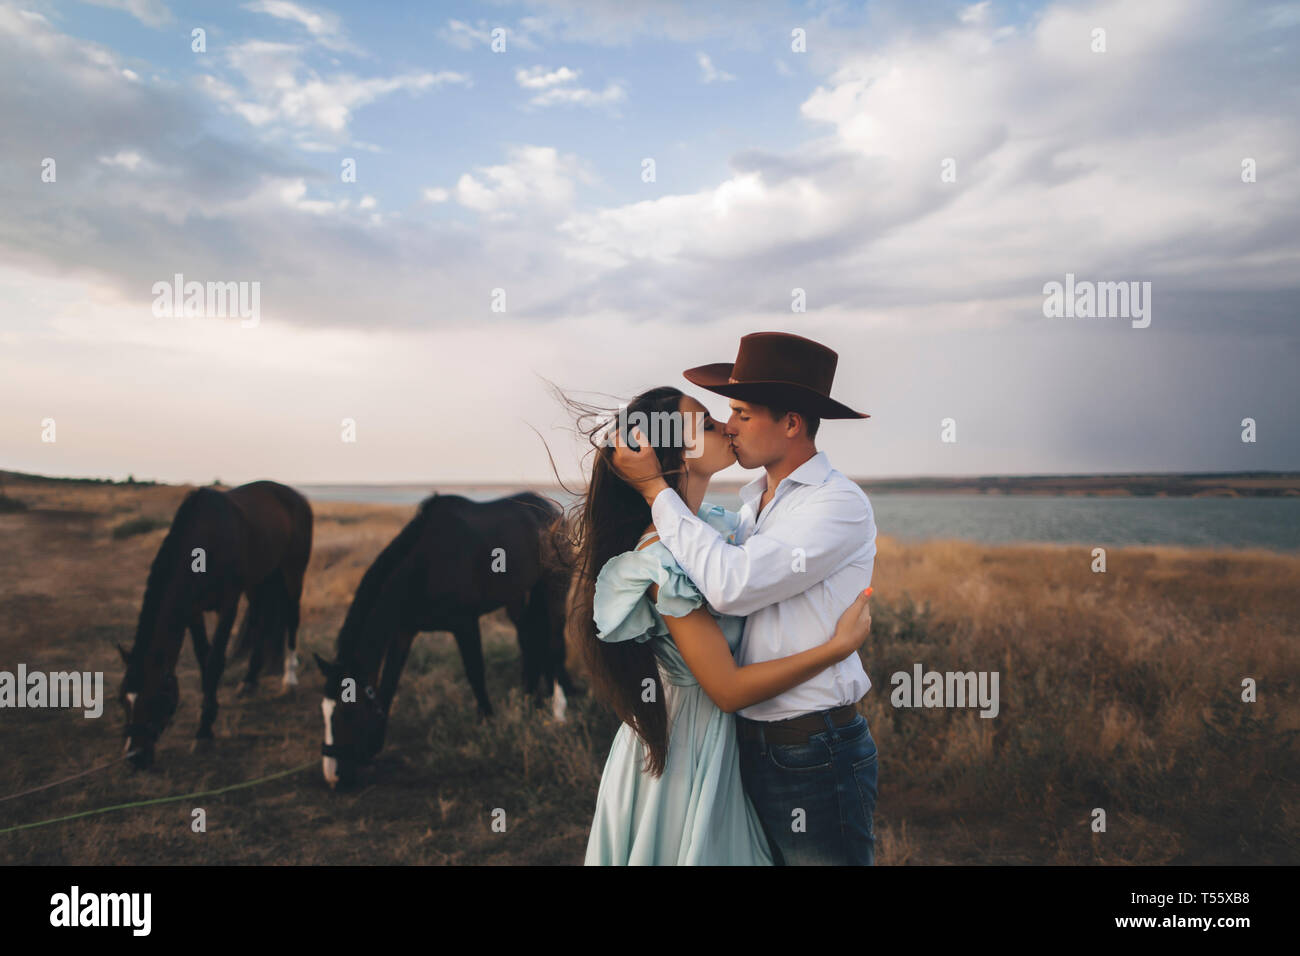 Young couple kissing in field by horses Stock Photo